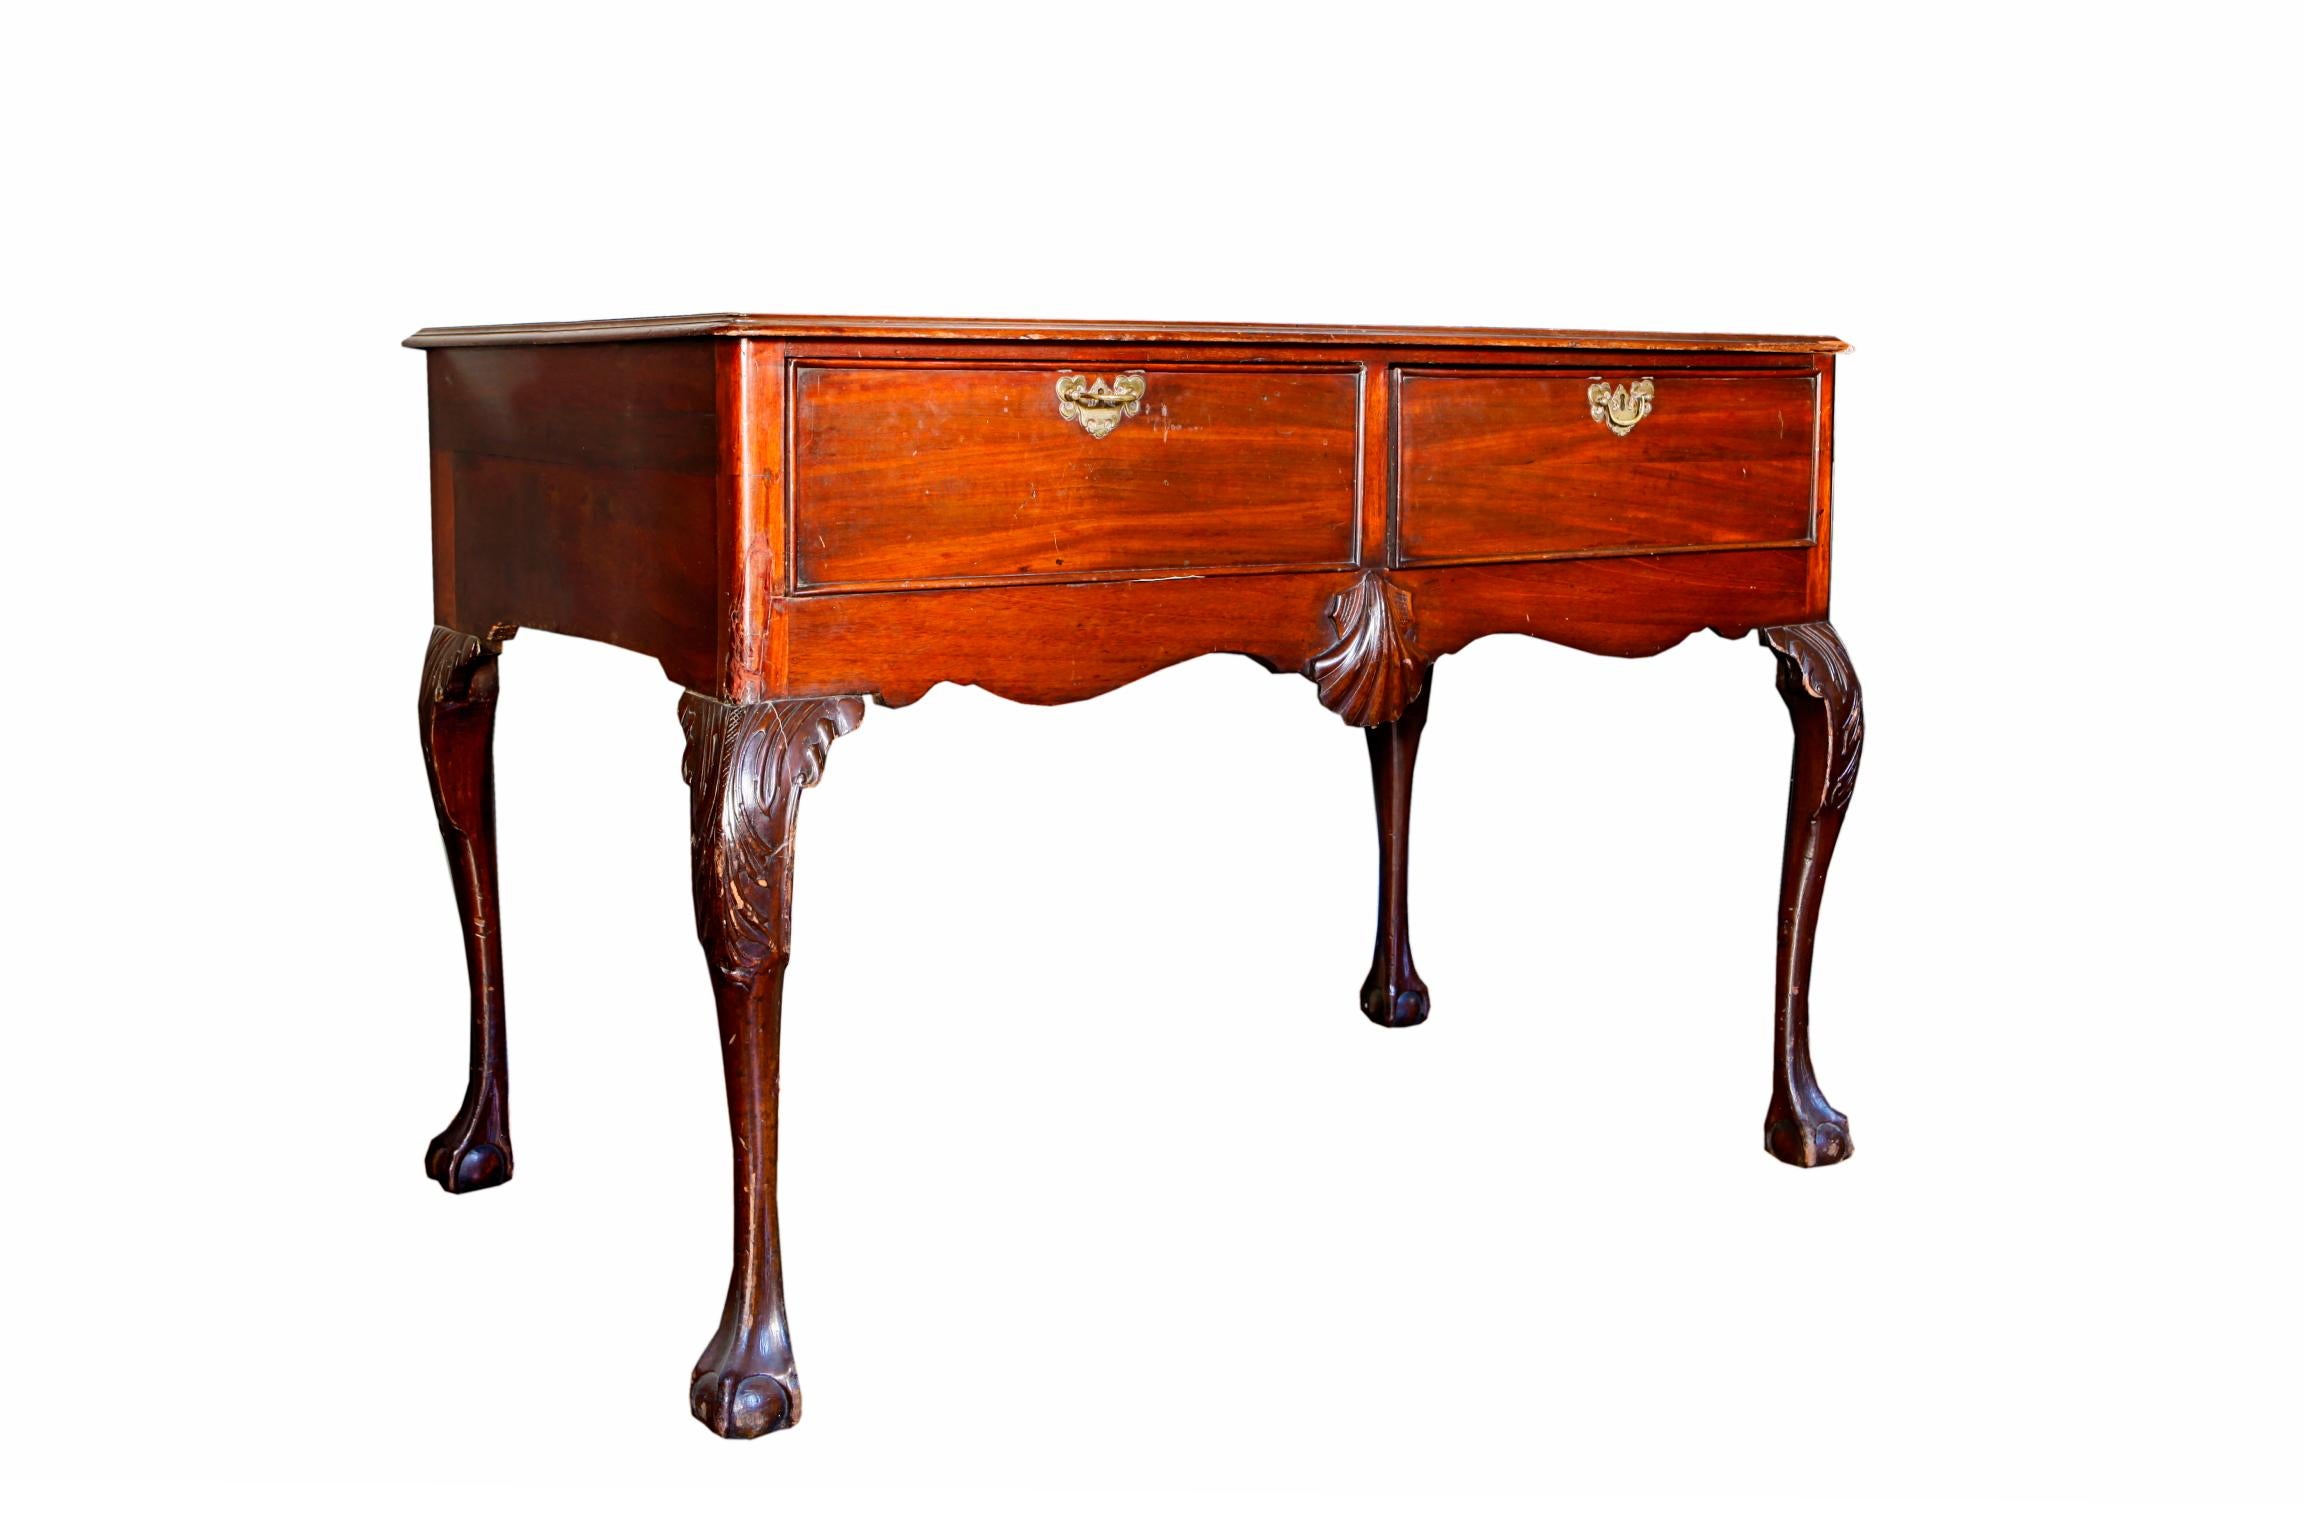 A 19th century Irish mahogany writing table or buffet. With an inset leather lined top, above two drawers, cabriole legs and finished on claw and ball feet.